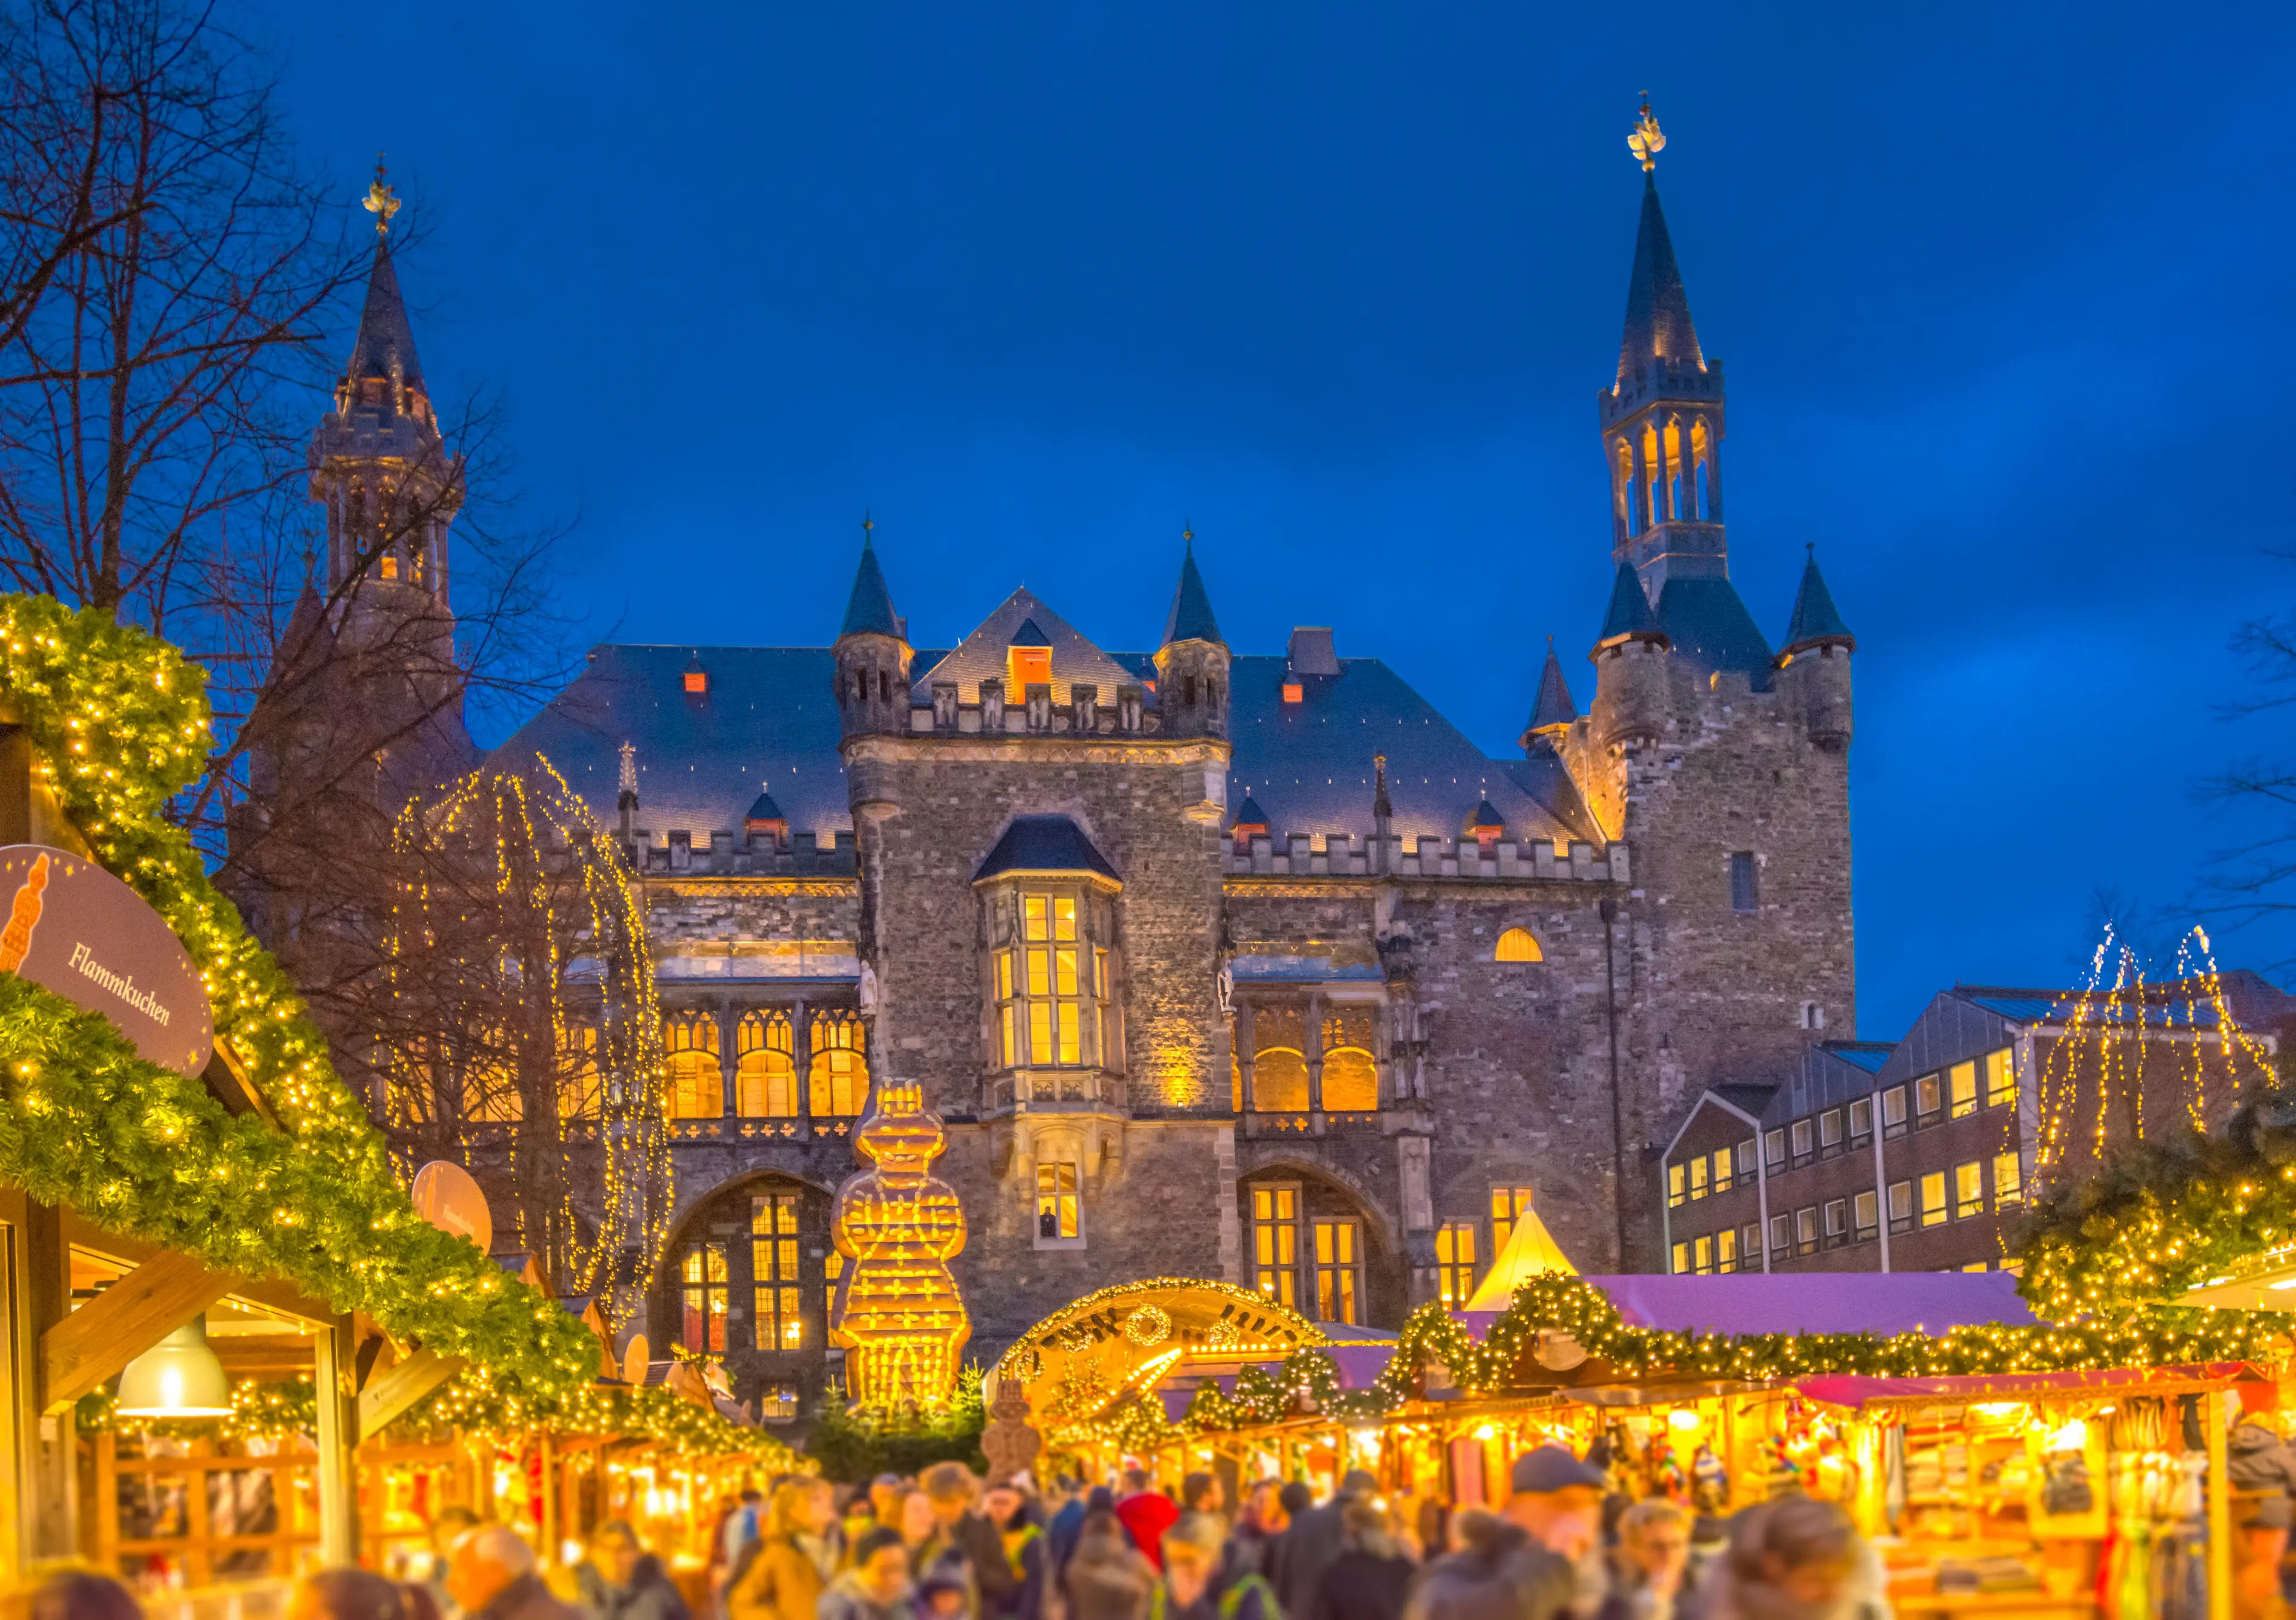 3-Day Family Christmas Holiday Itinerary in Aachen, Germany